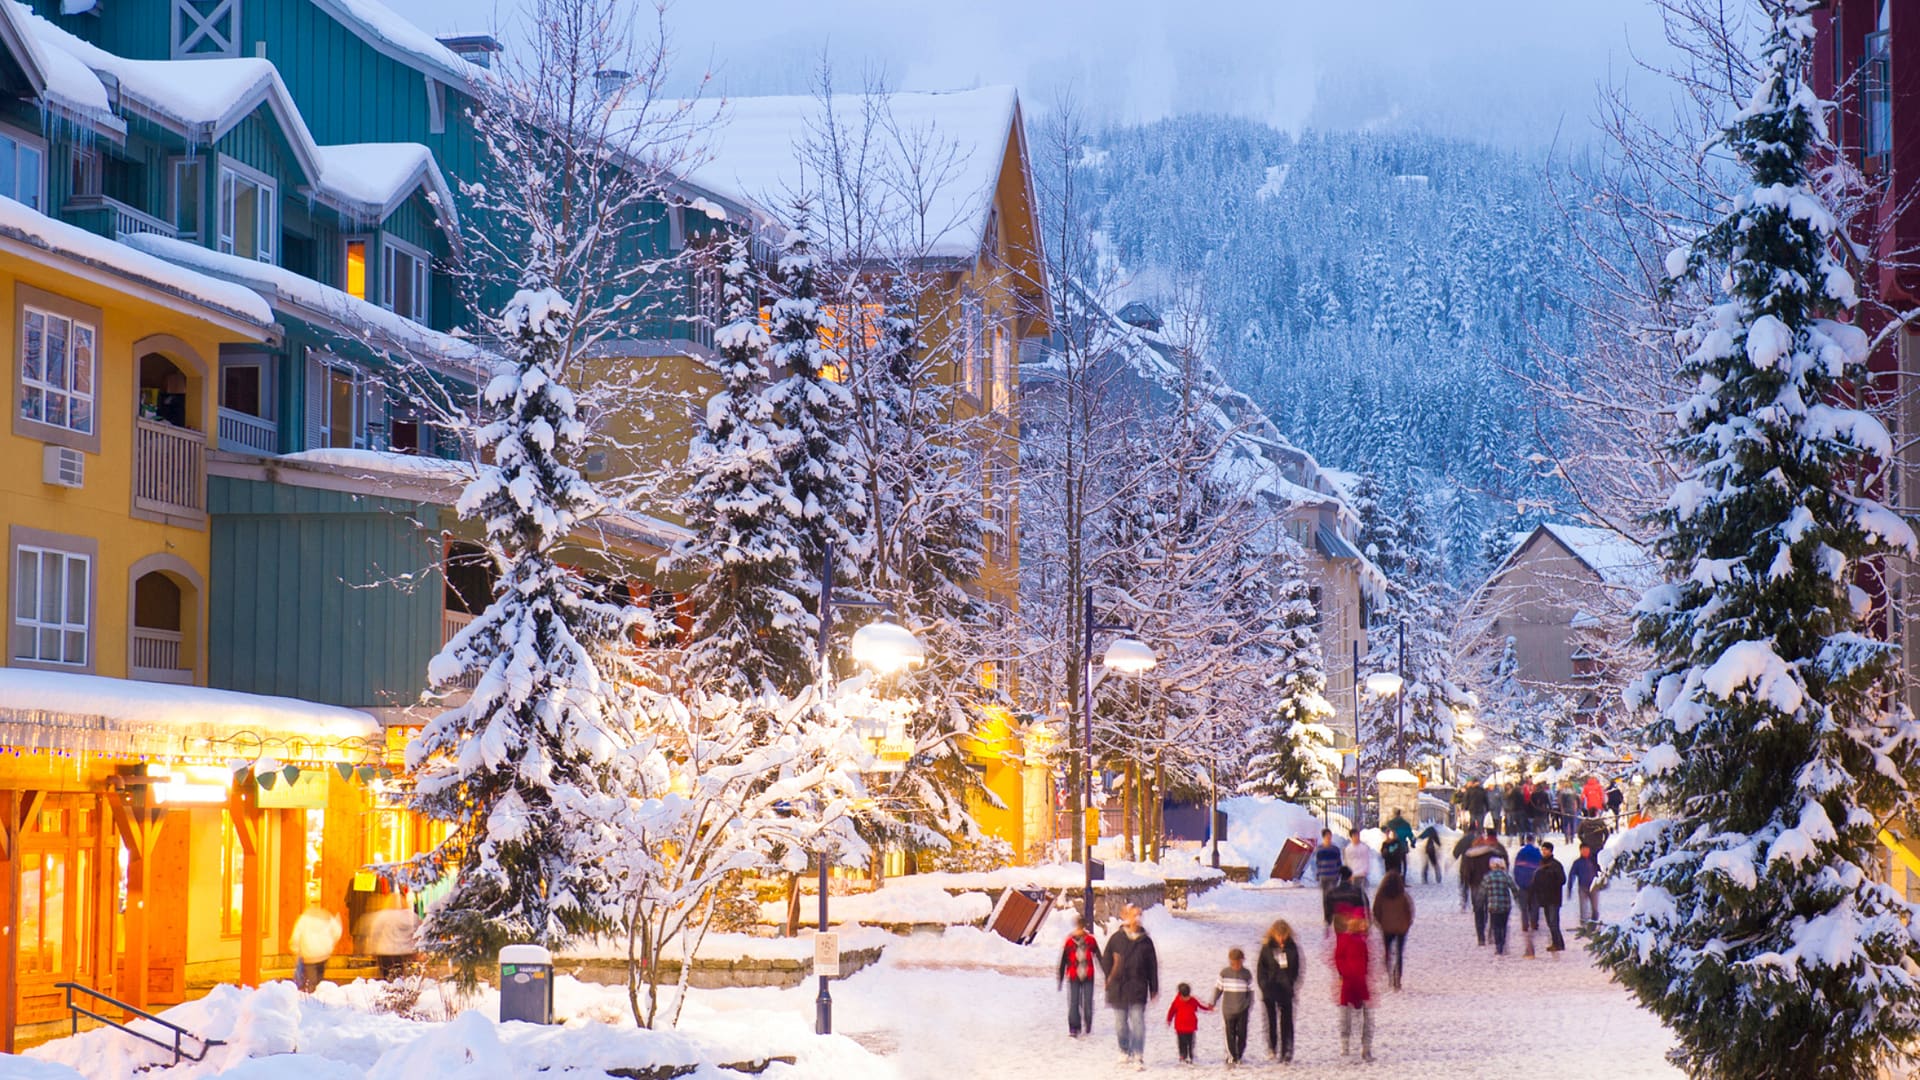 Whistler's world class pedestrian village filled with shops, hotels and restaurants blanketed with fresh snow at dusk